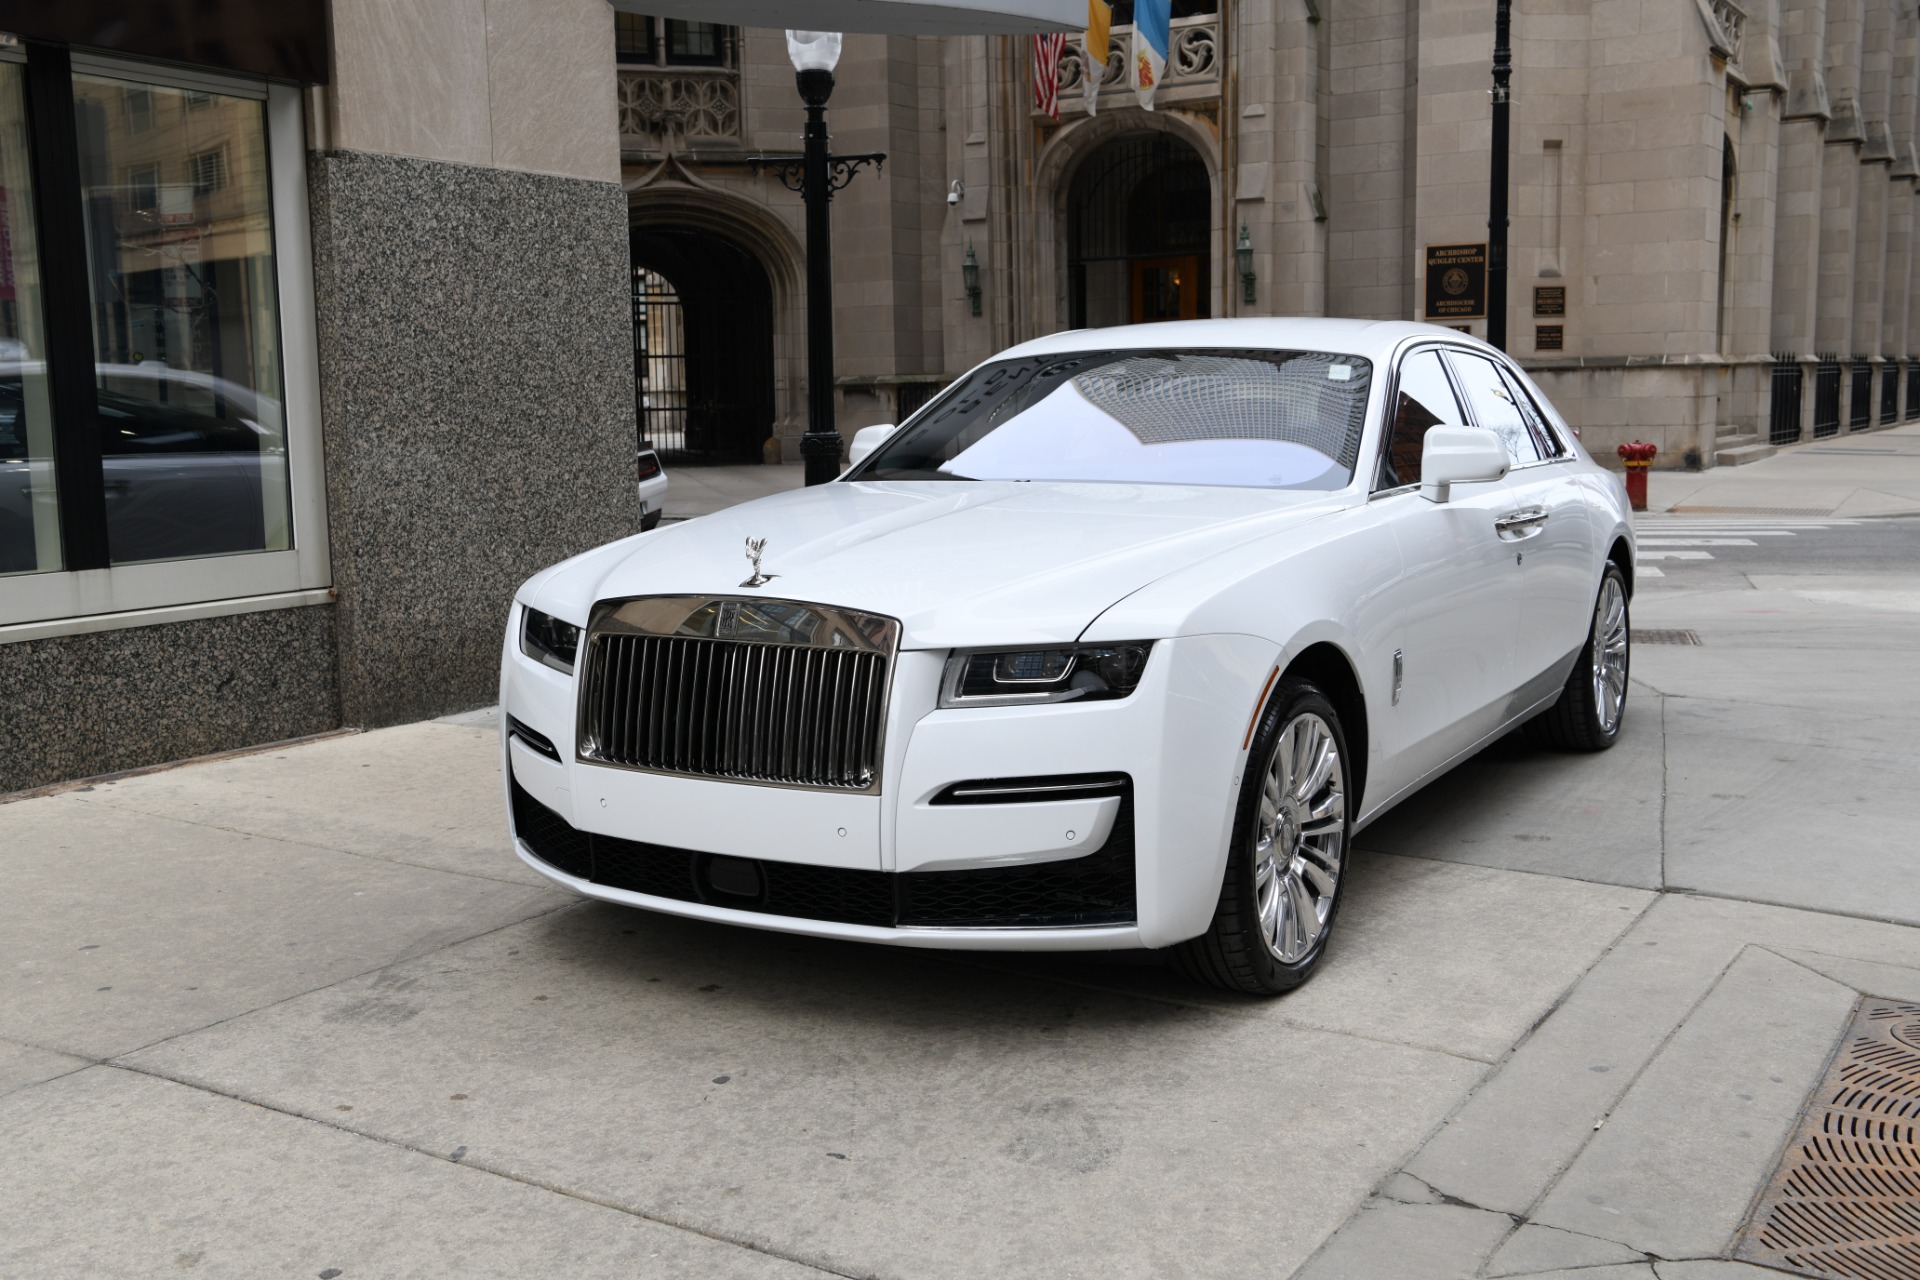 2021 Rolls Royce Ghost - Prices Start From $332,500 (Approx Rs 2.43 cr)